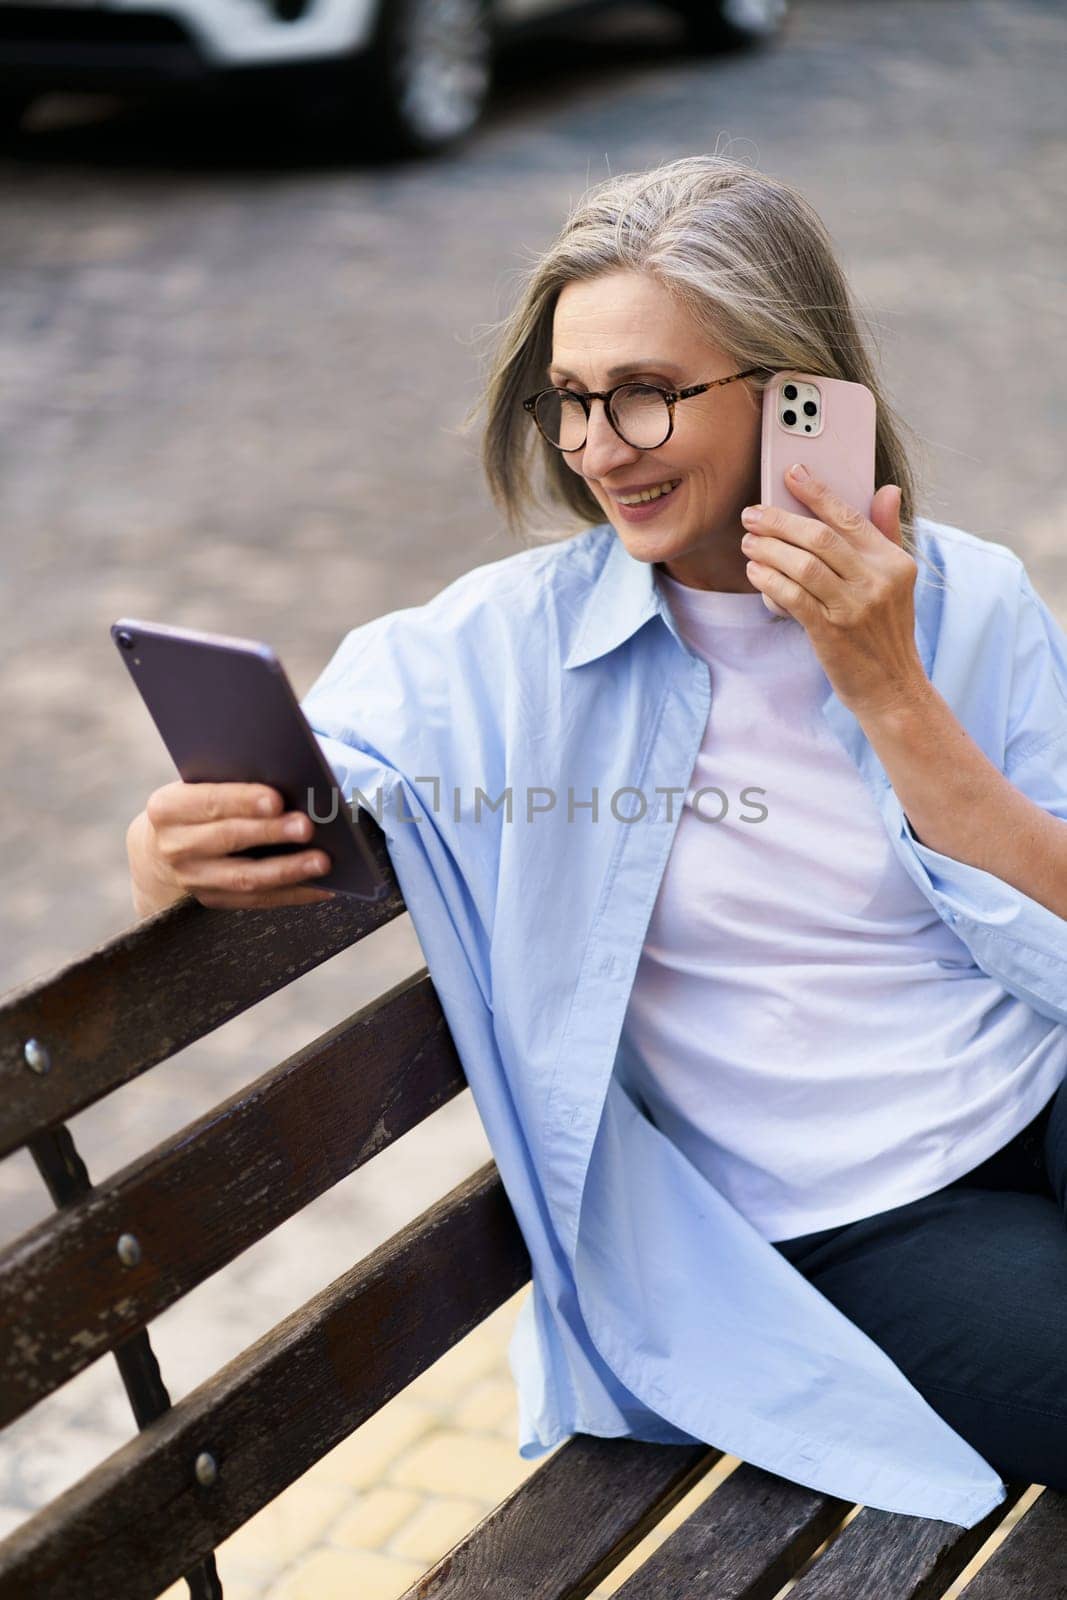 Happy senior woman is multitasking with a tablet PC and phone call on a busy city street. She showcases modern technology and active lifestyle in the elderly population. by LipikStockMedia